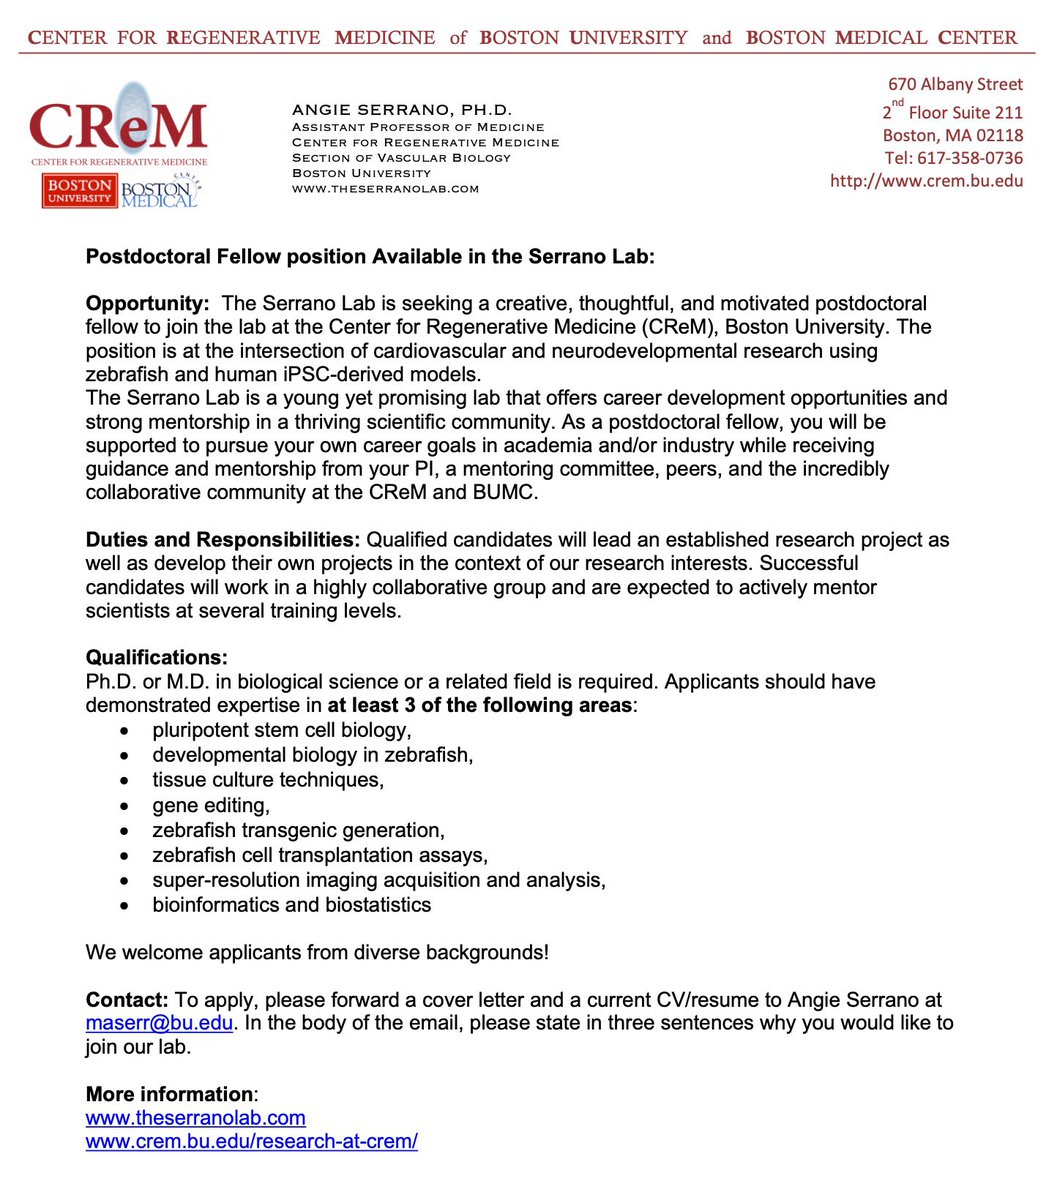 And now…we are ready for you! We are hiring a postdoc! I will only say, we want you to be successful and we do it as a team! Come and join us! #zebrafish #iPSC #BrainOrganoids #RareDisease Retweet appreciated! @ZebrafishRock @BU_Tweets @BUMedicine crem.bu.edu/now-hiring/